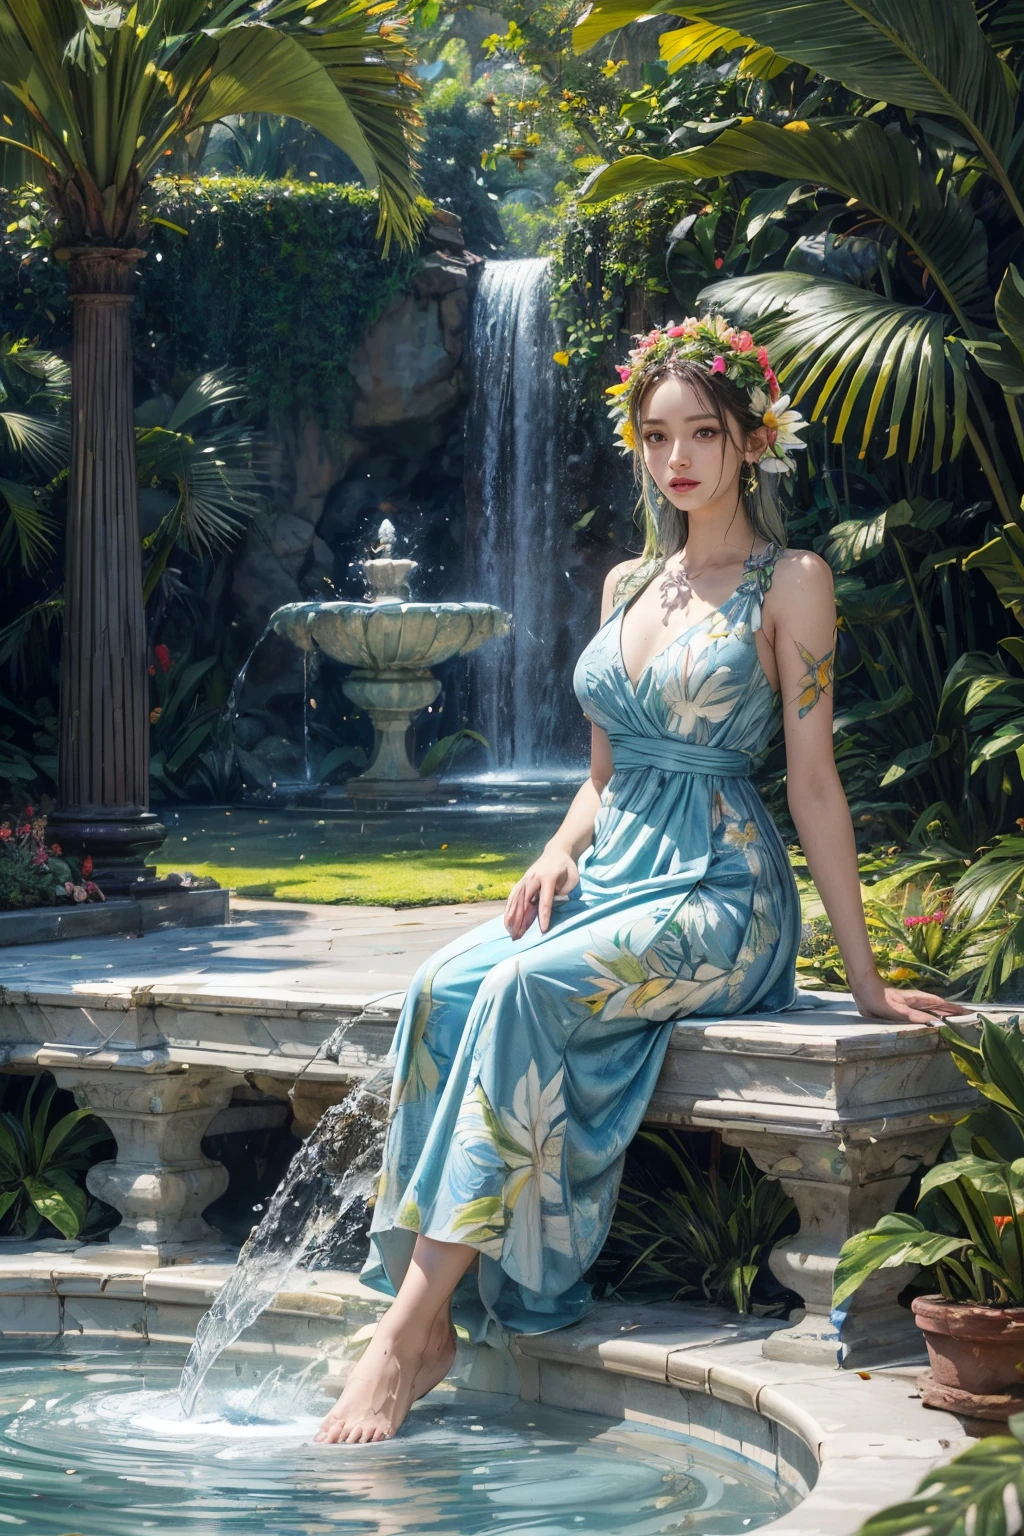 (Best quality,4K,tmasterpiece:1.2),tropical garden，There is a fountain，(Beauty plaster statue fountain，The whole body is made of white plaster)，The statue stands majestically, The expression is serious，Spring water gushes from her feet, Surrounded by vibrant gardens, Featuring exotic flowers and plants such as hibiscus and bromeliads. The garden should have a bold and eye-catching appearance, Have large, colorful leaves. The placement of plants should give people a sense of grandeur, Water features and sculptures add drama.